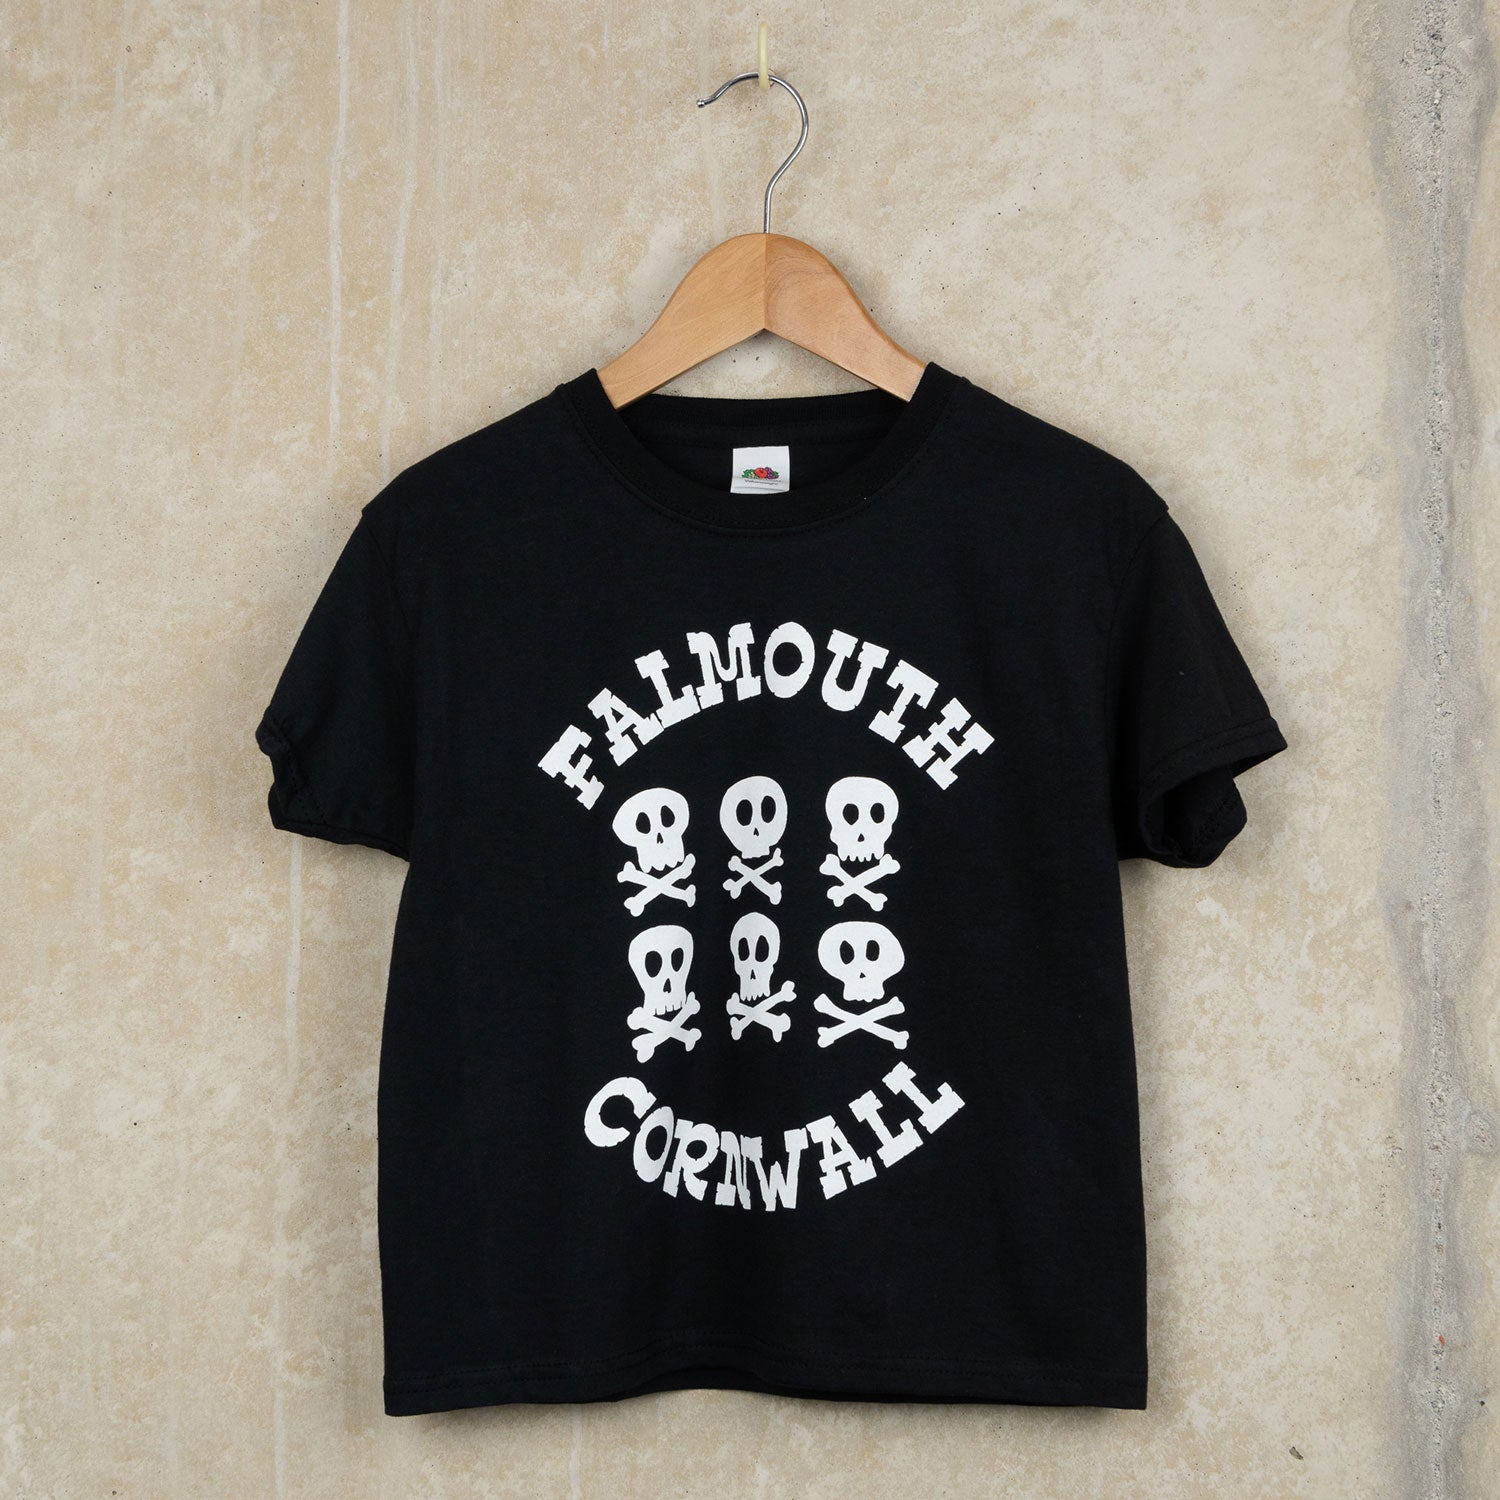 A child's black t-shirt featuring six white skull and crossbones and the words Falmouth Cornwall.